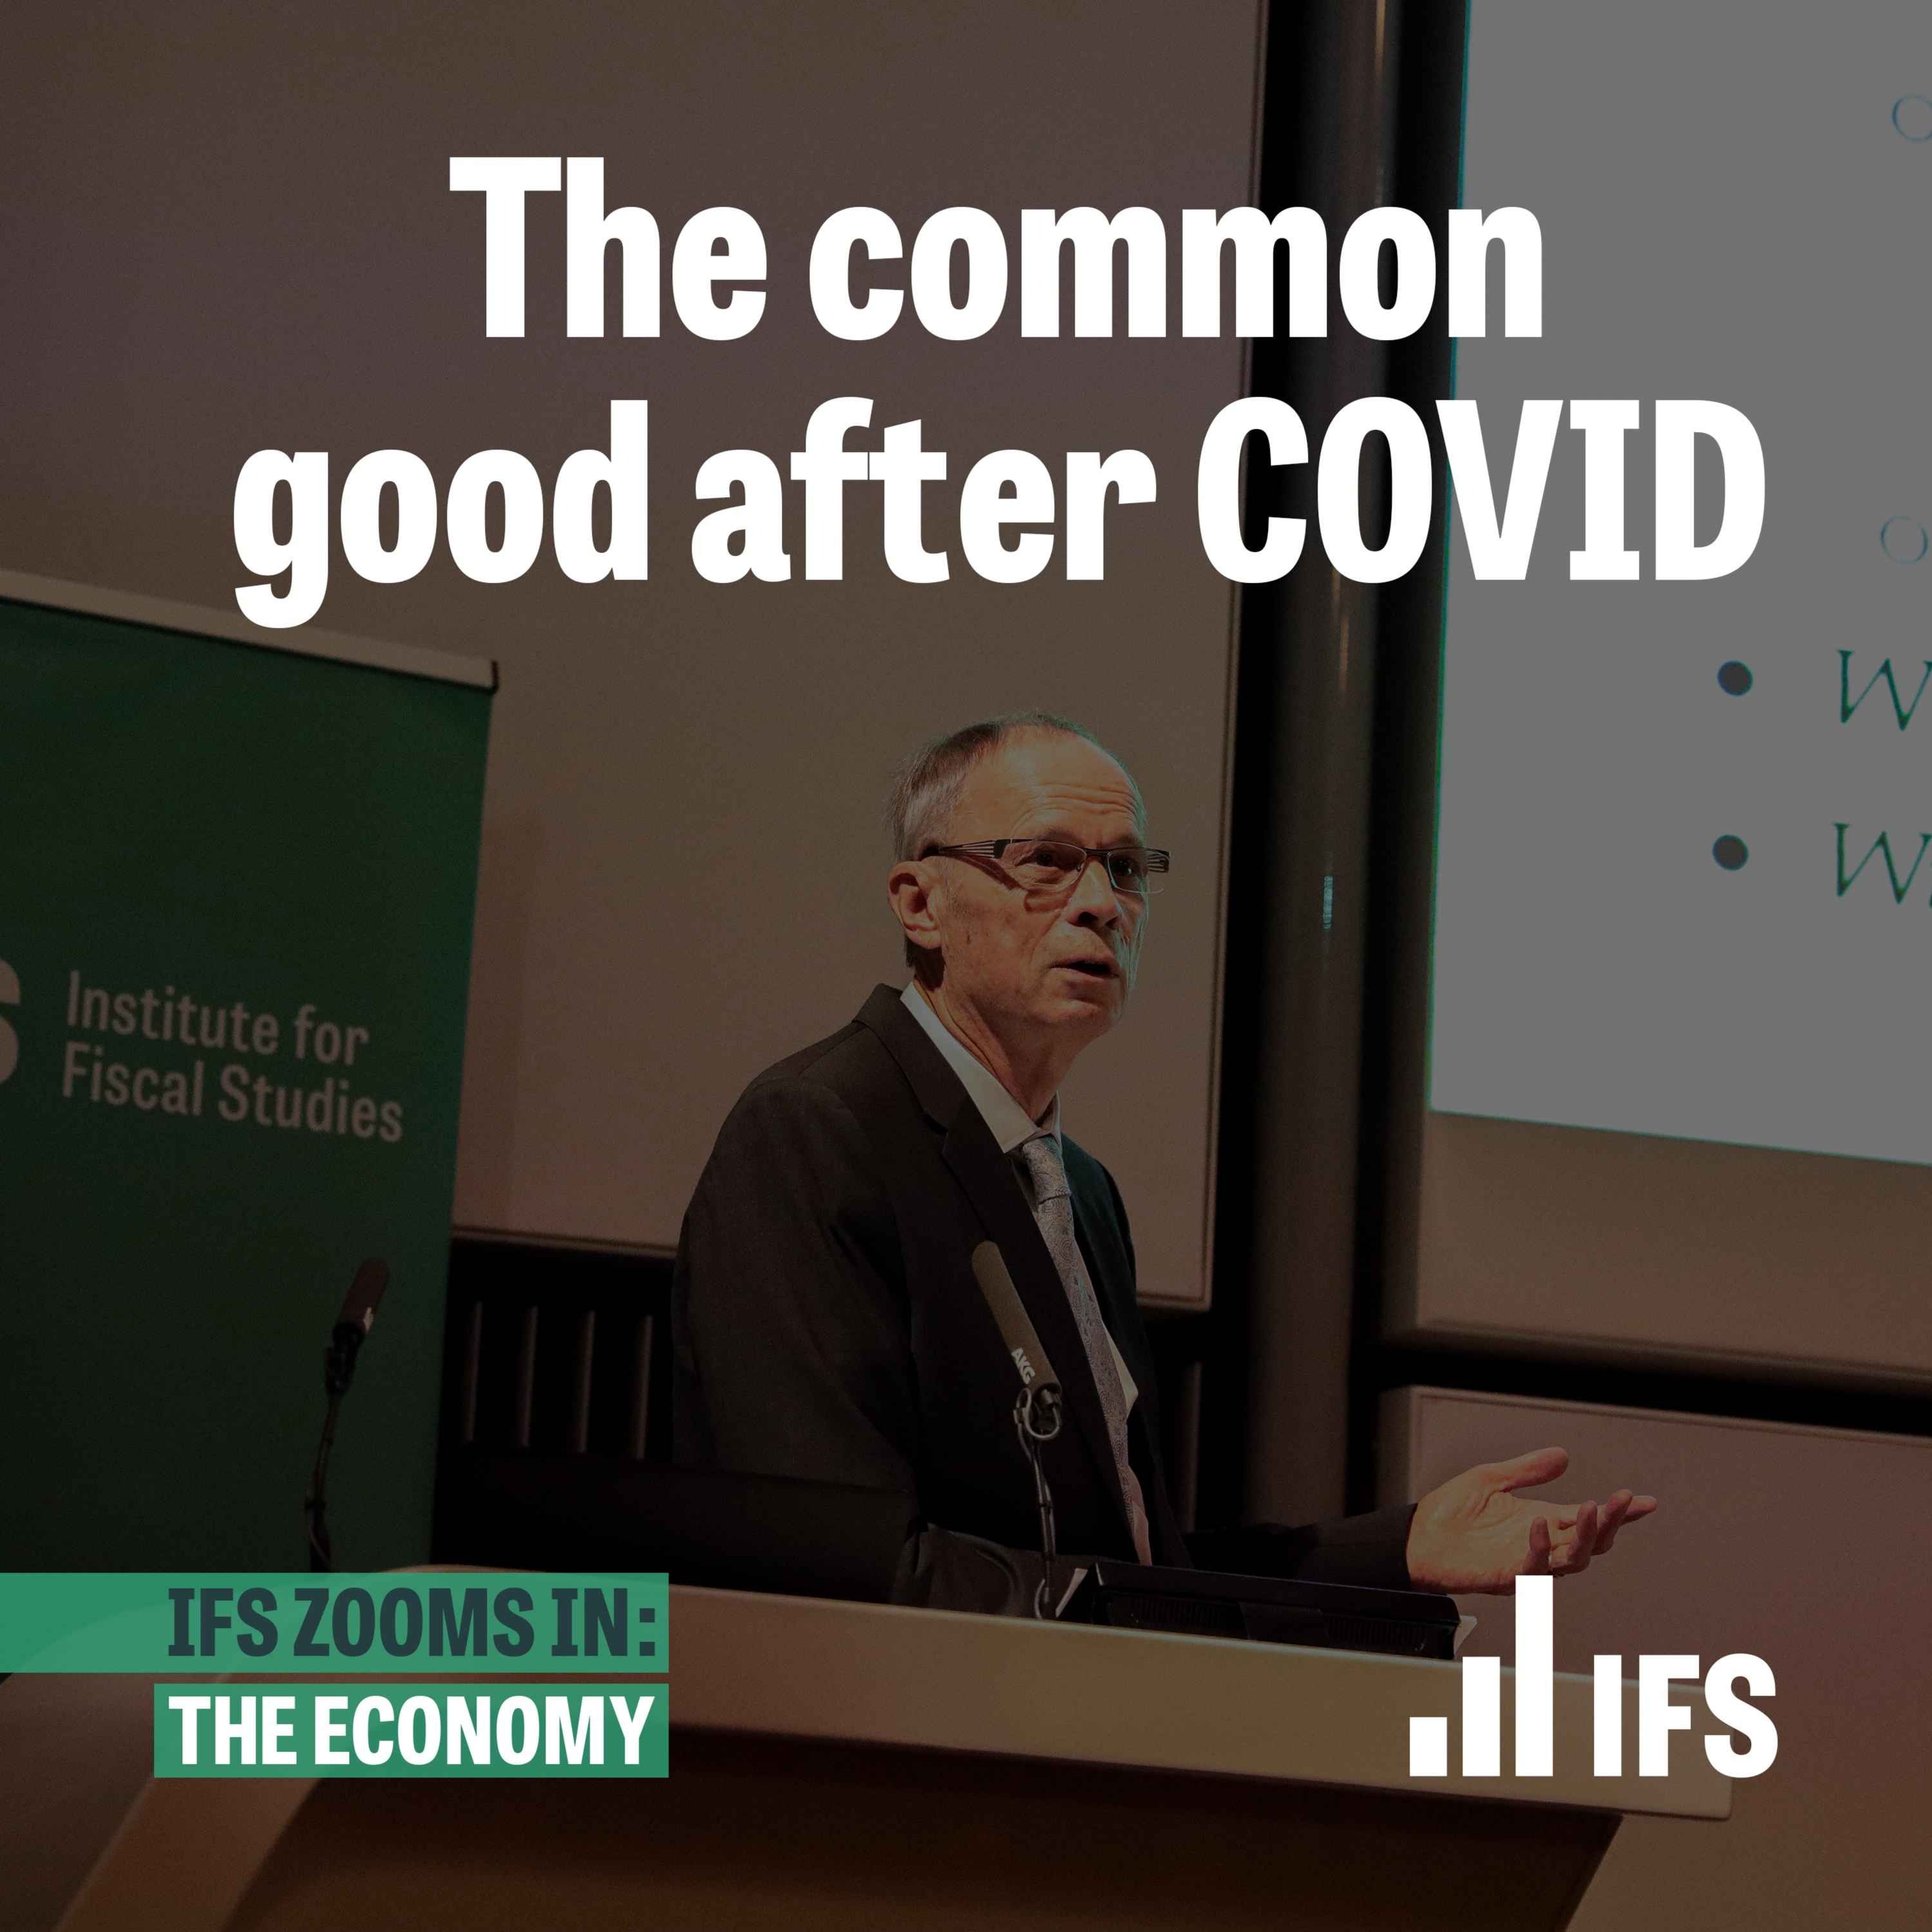 The common good after Covid